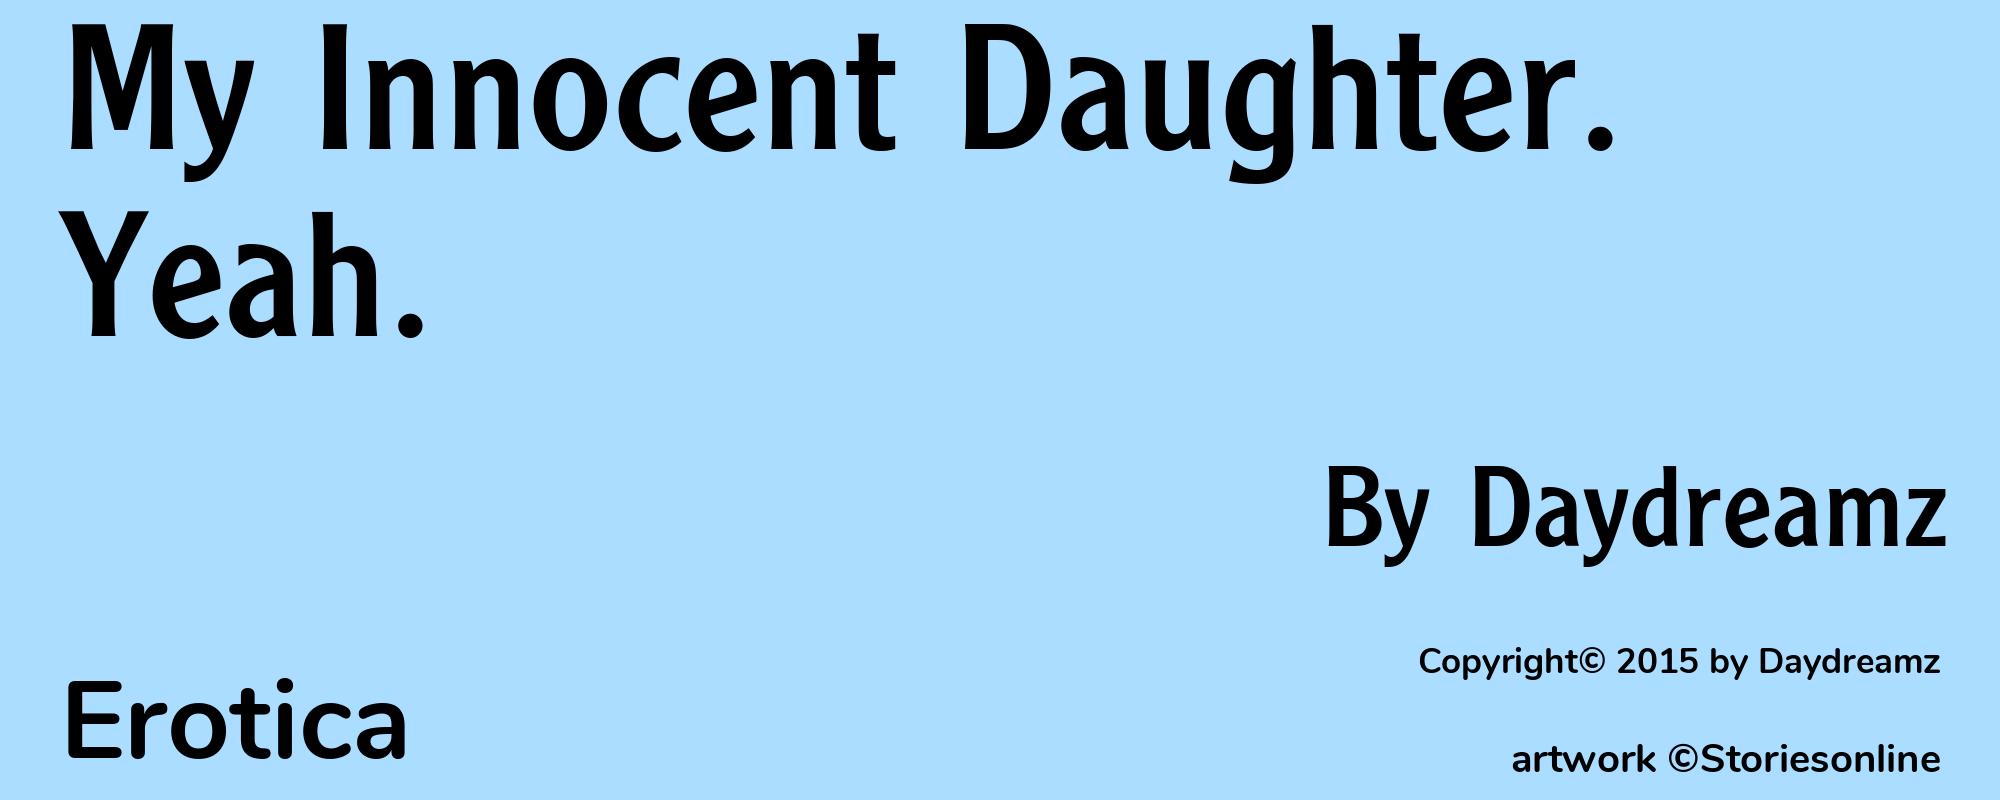 My Innocent Daughter. Yeah. - Cover